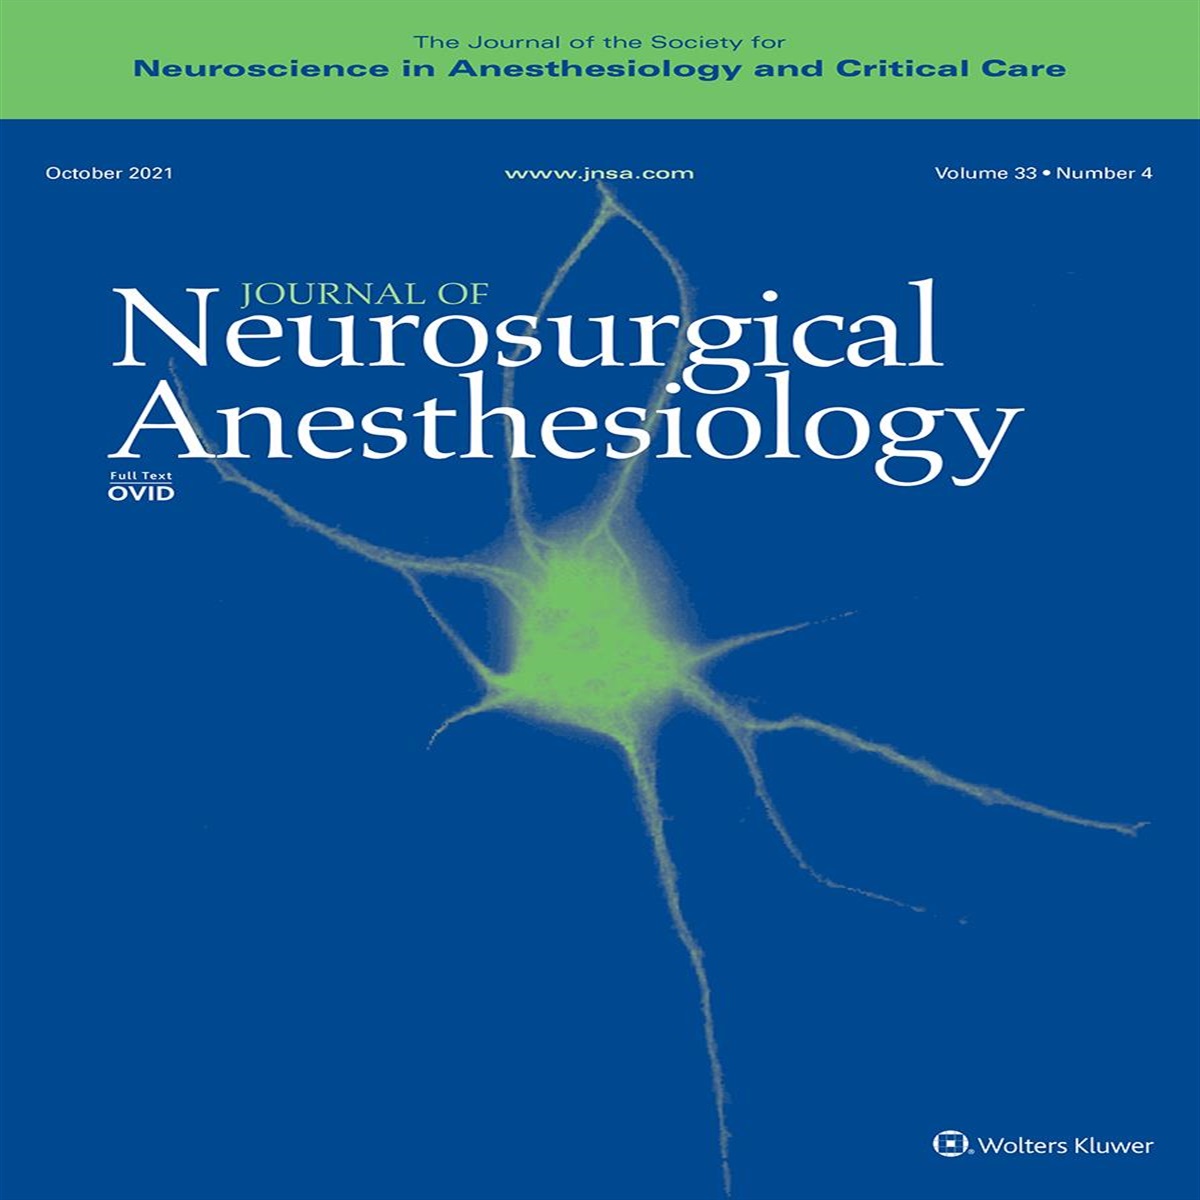 Abstracts From the 49th Annual Meeting of the Society for Neuroscience in Anesthesiology and Critical Care, September 10-12, 2021